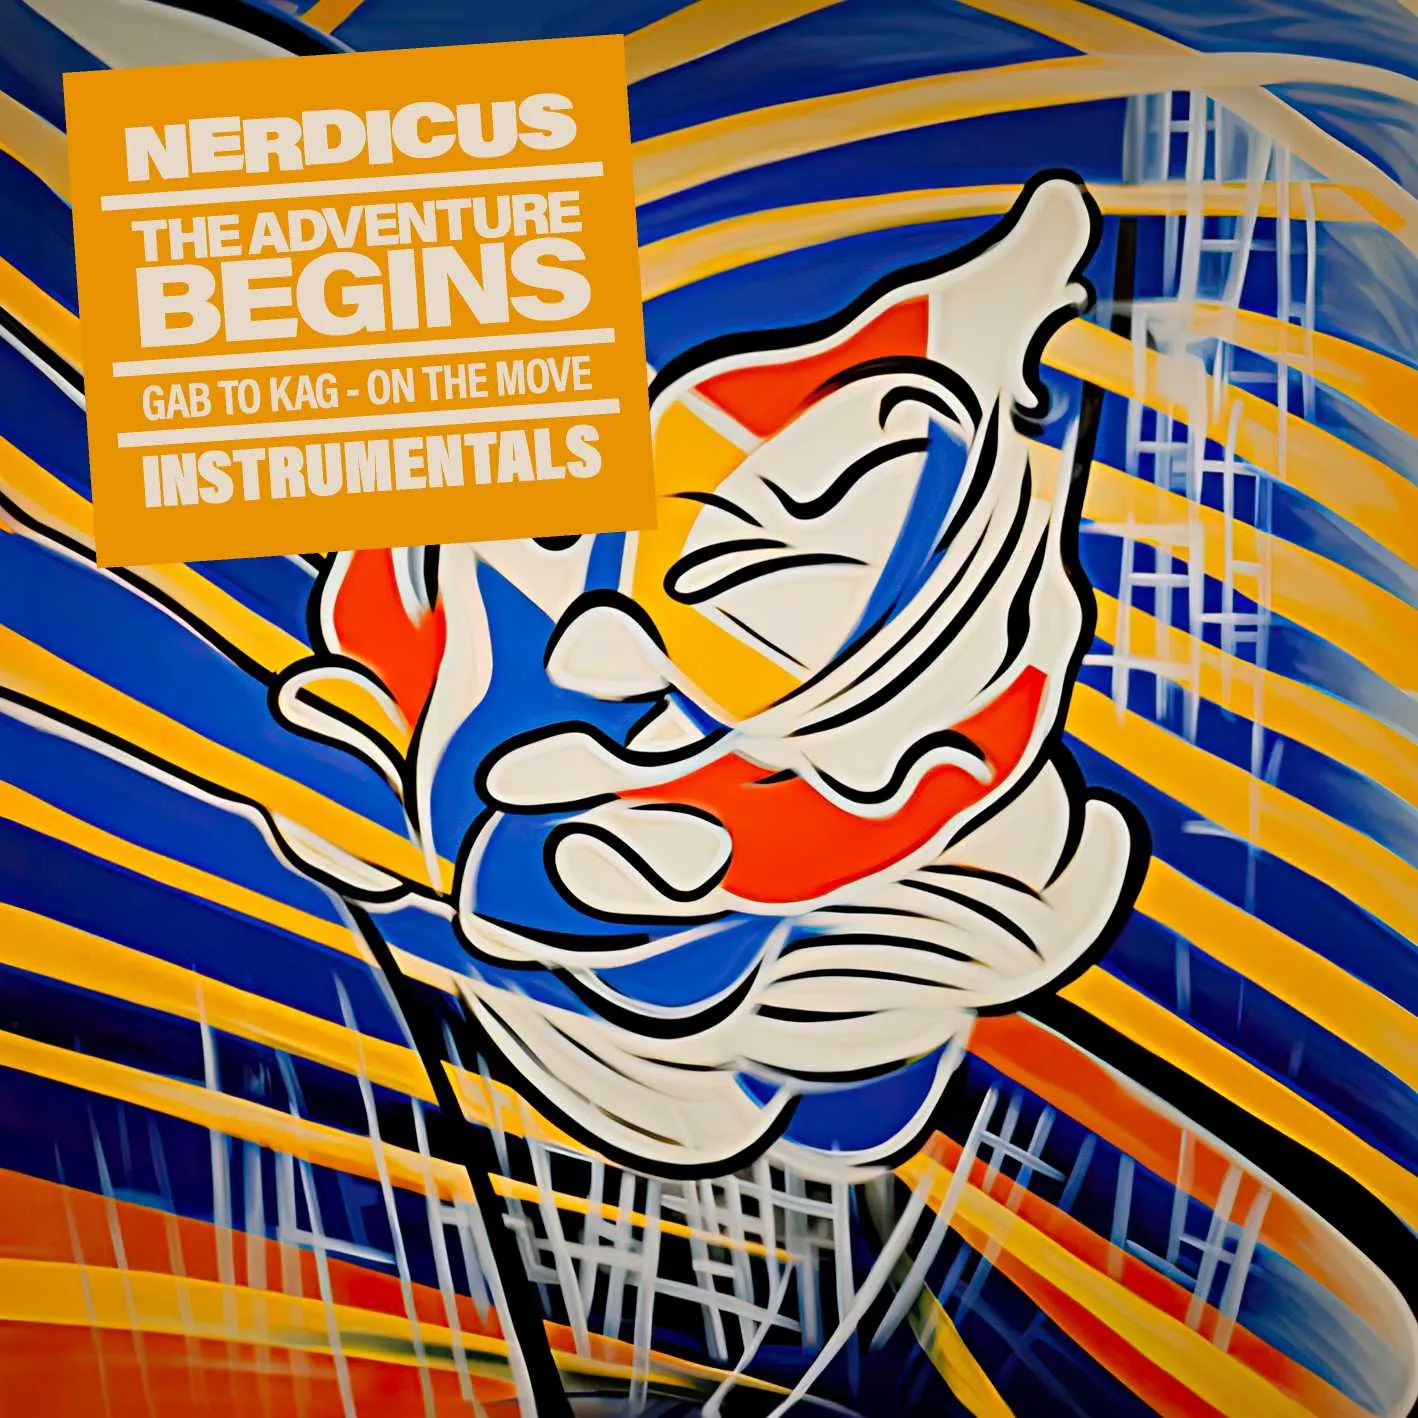 Album cover for “The Adventure Begins - Gab to Kag - On The Move (Instrumentals)” by Nerdicus